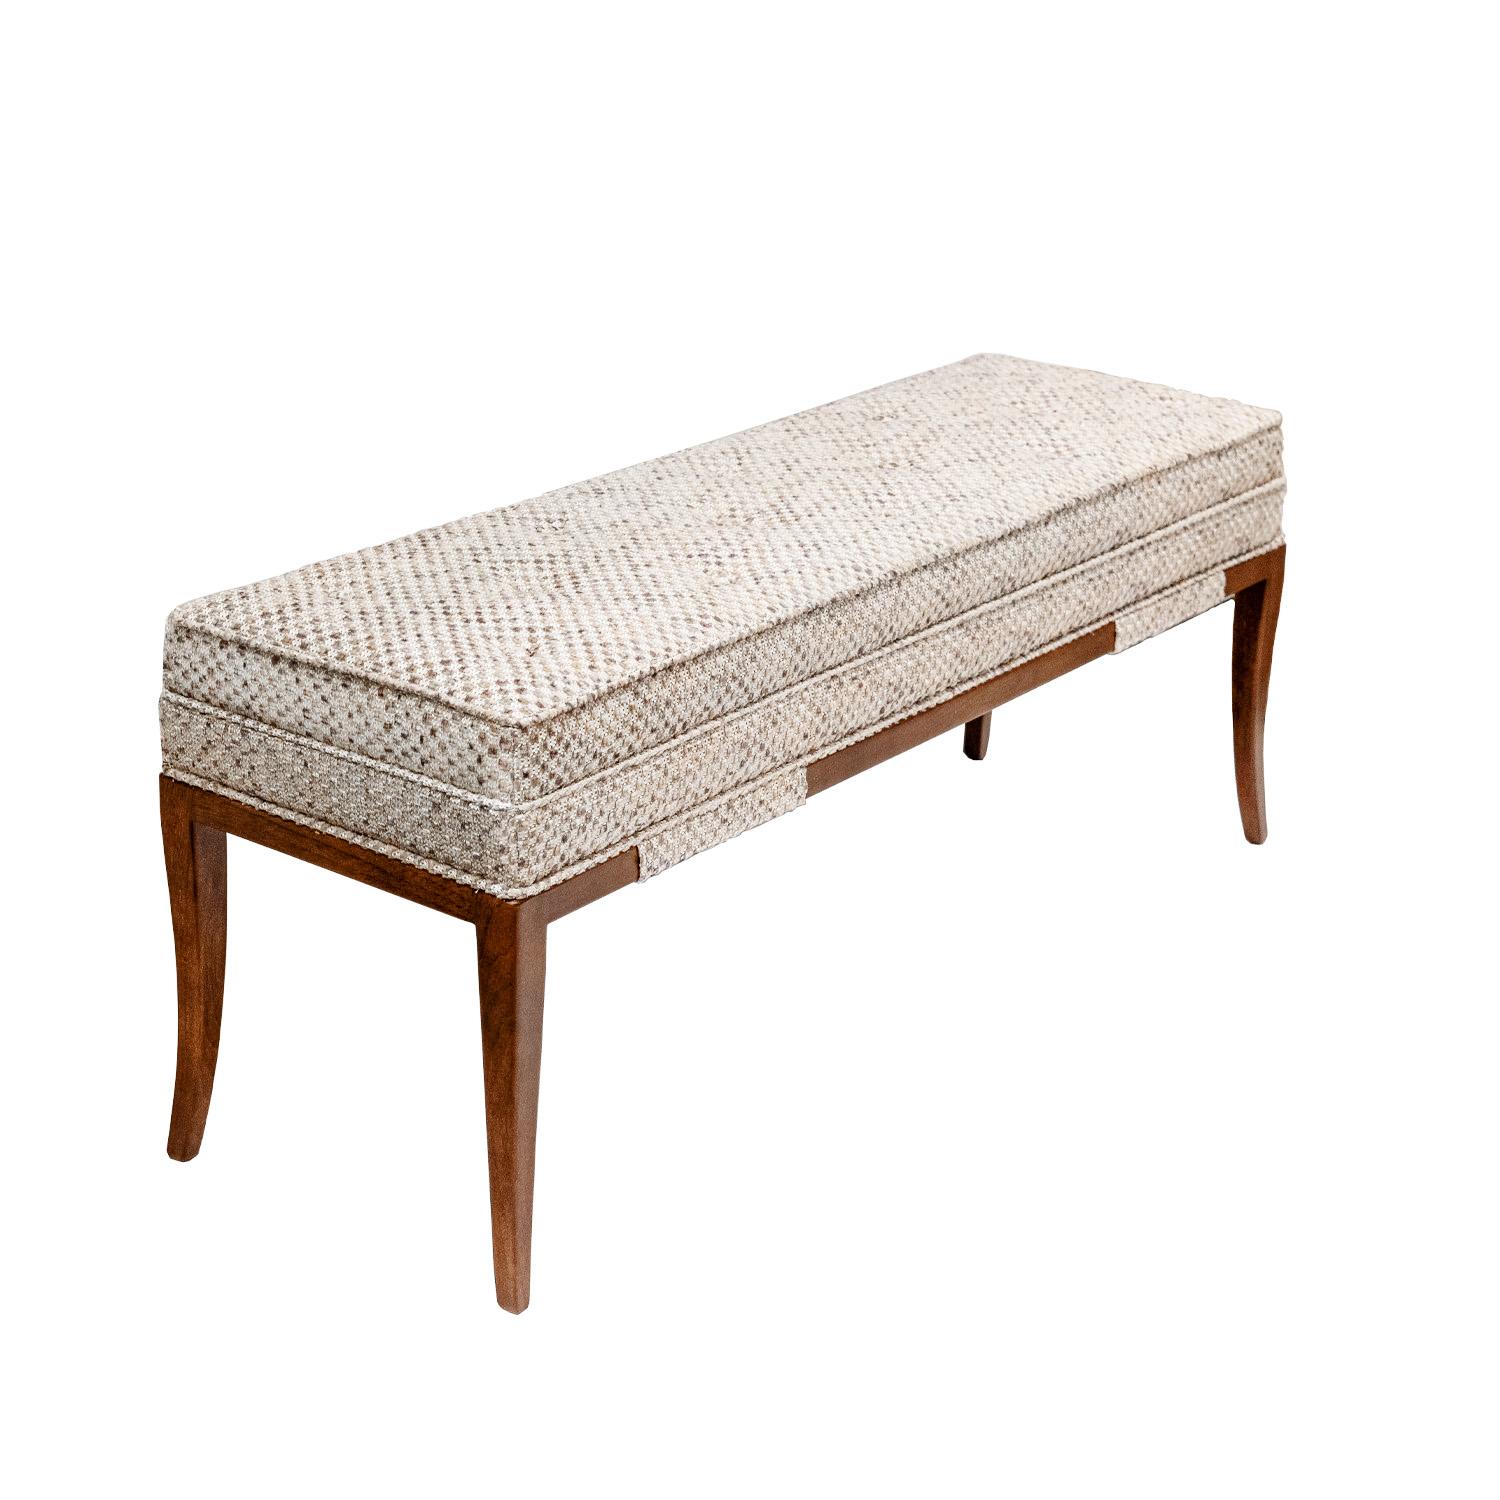 Mid-Century Modern Tommi Parzinger Elegant Upholstered Bench with Tapering Legs 1950s For Sale